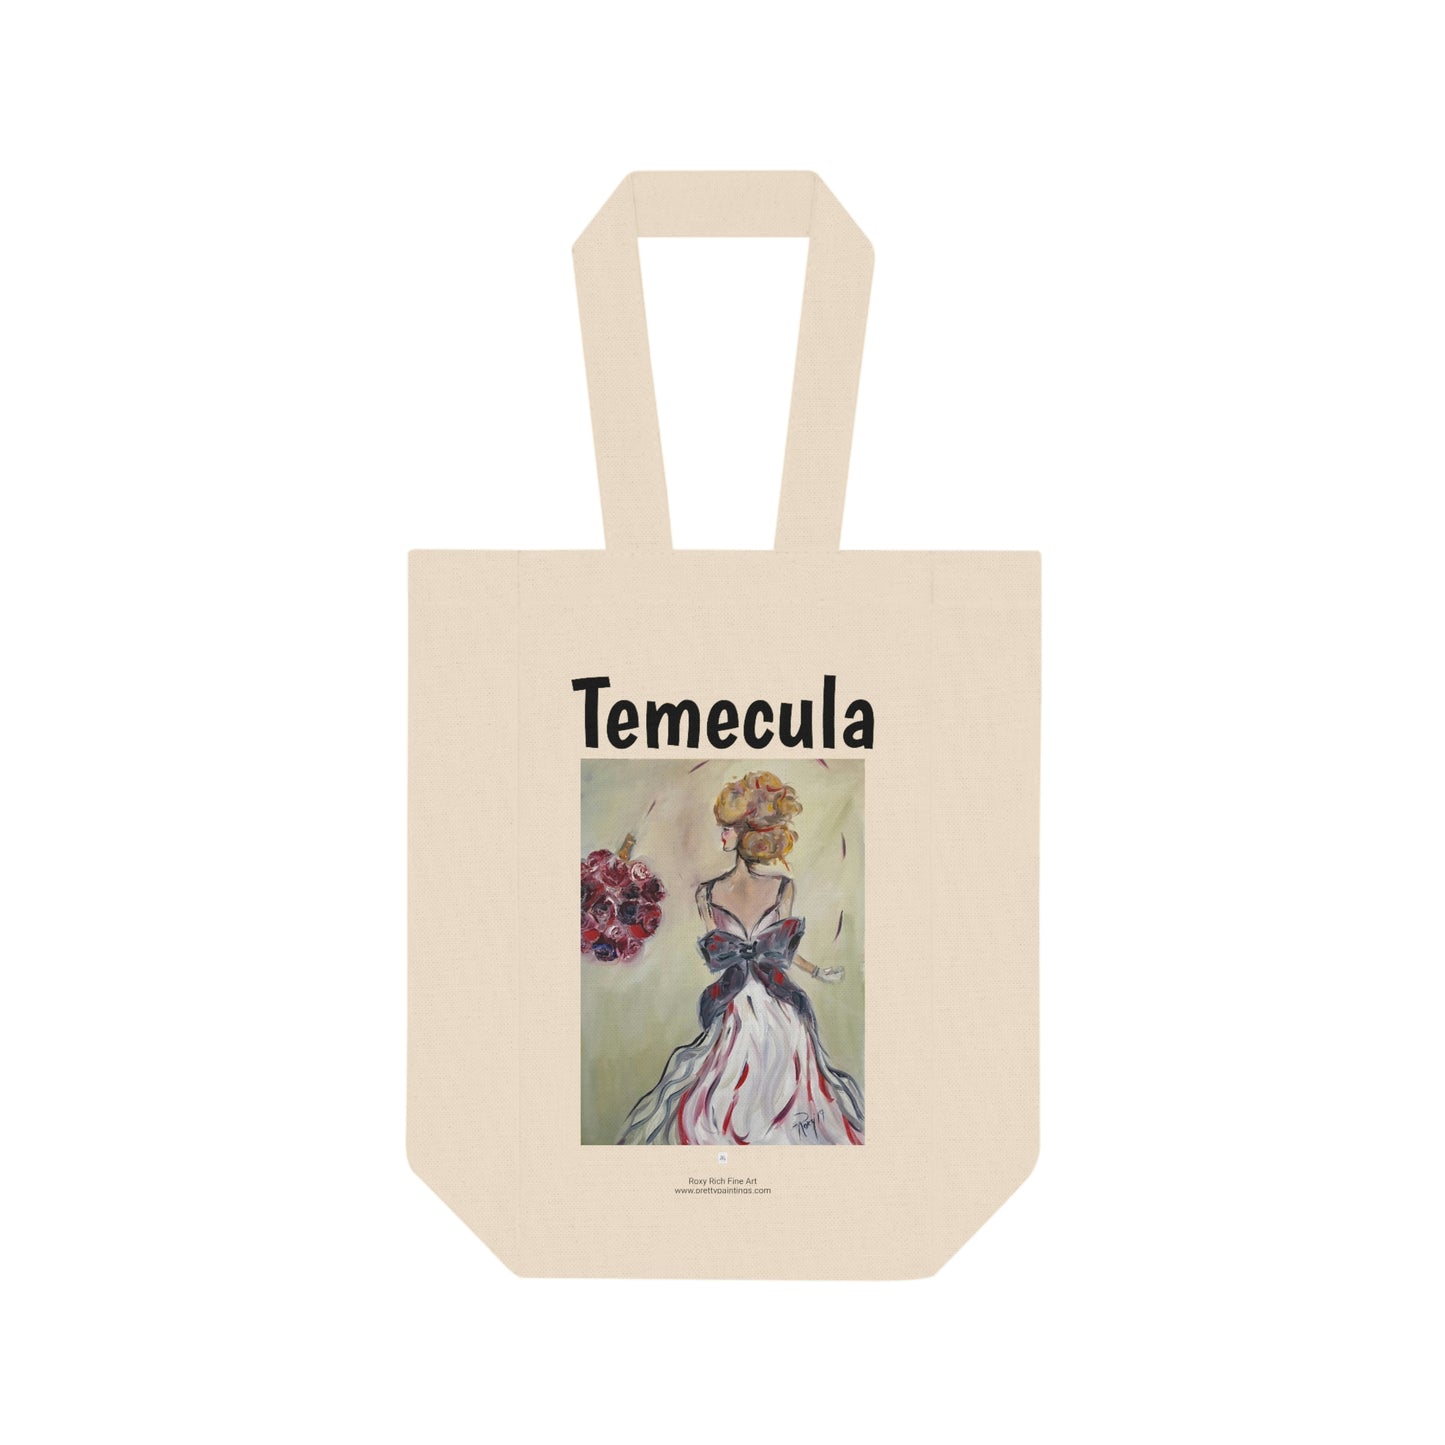 Temecula Double Wine Tote Bag featuring "Who's Next?"  Bride tossing bouquet painting